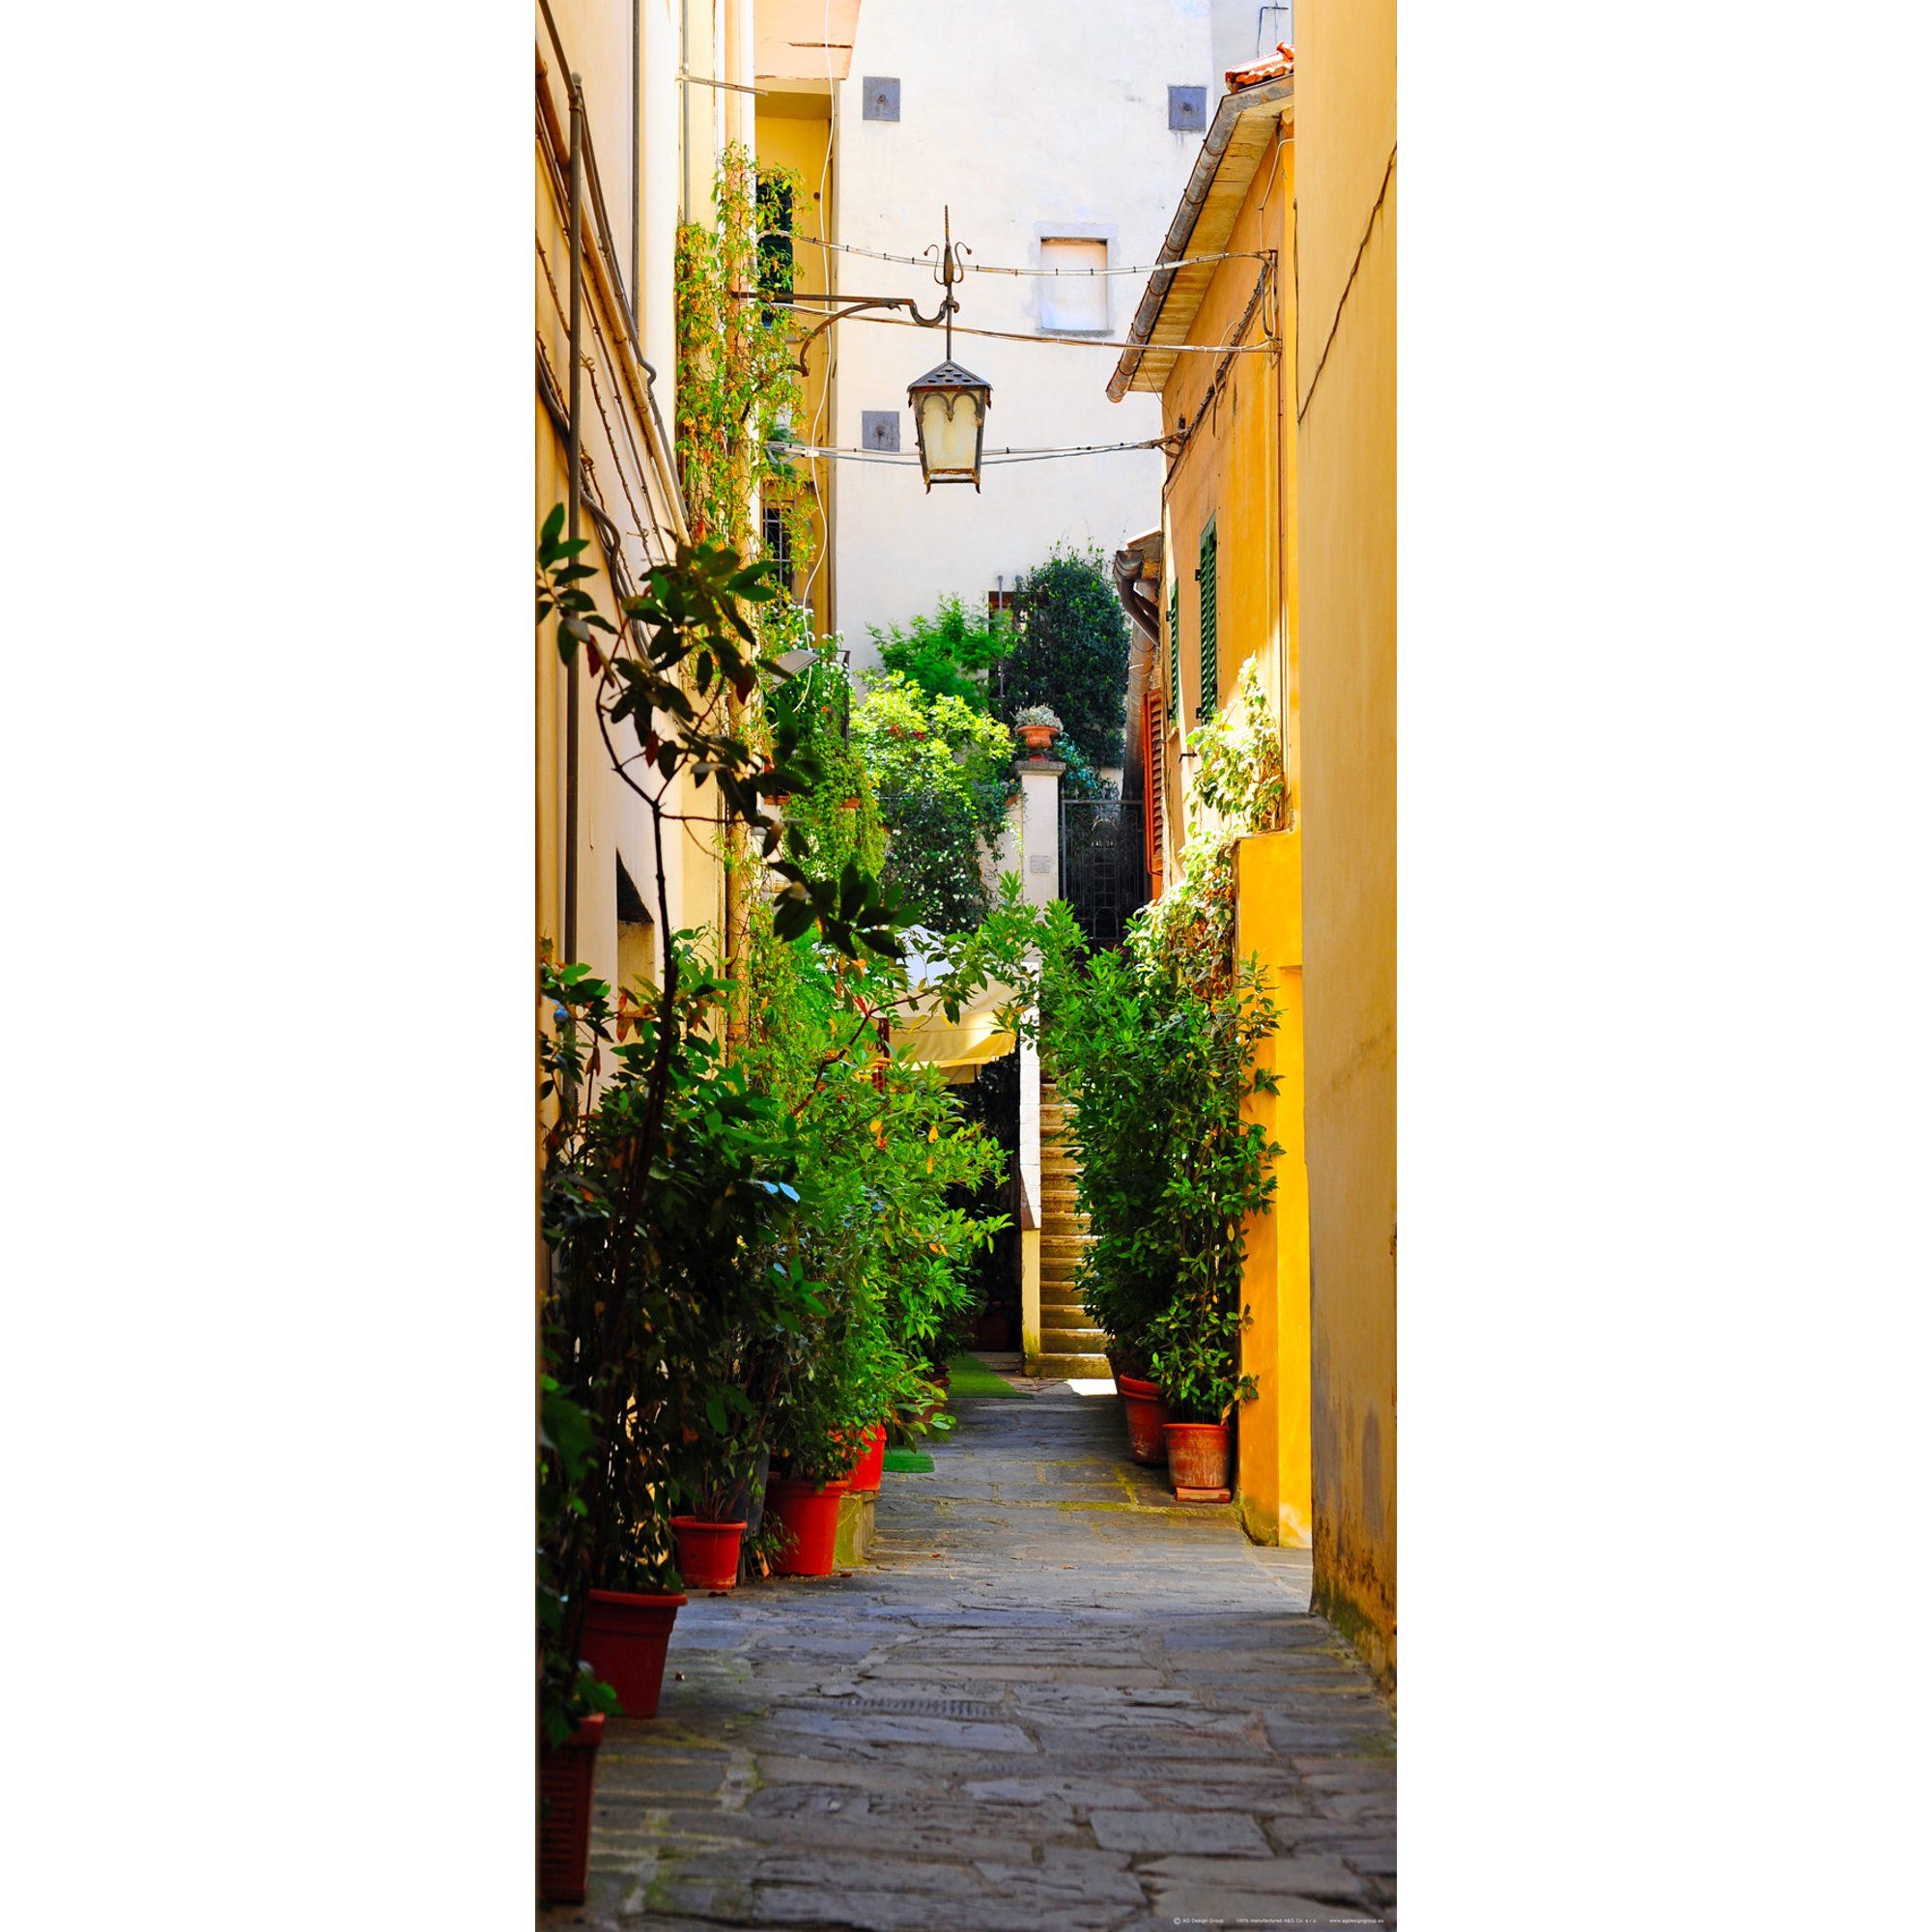 Narrow Alley Lane with Old Houses in Arezzo Italy Wall Mural Non